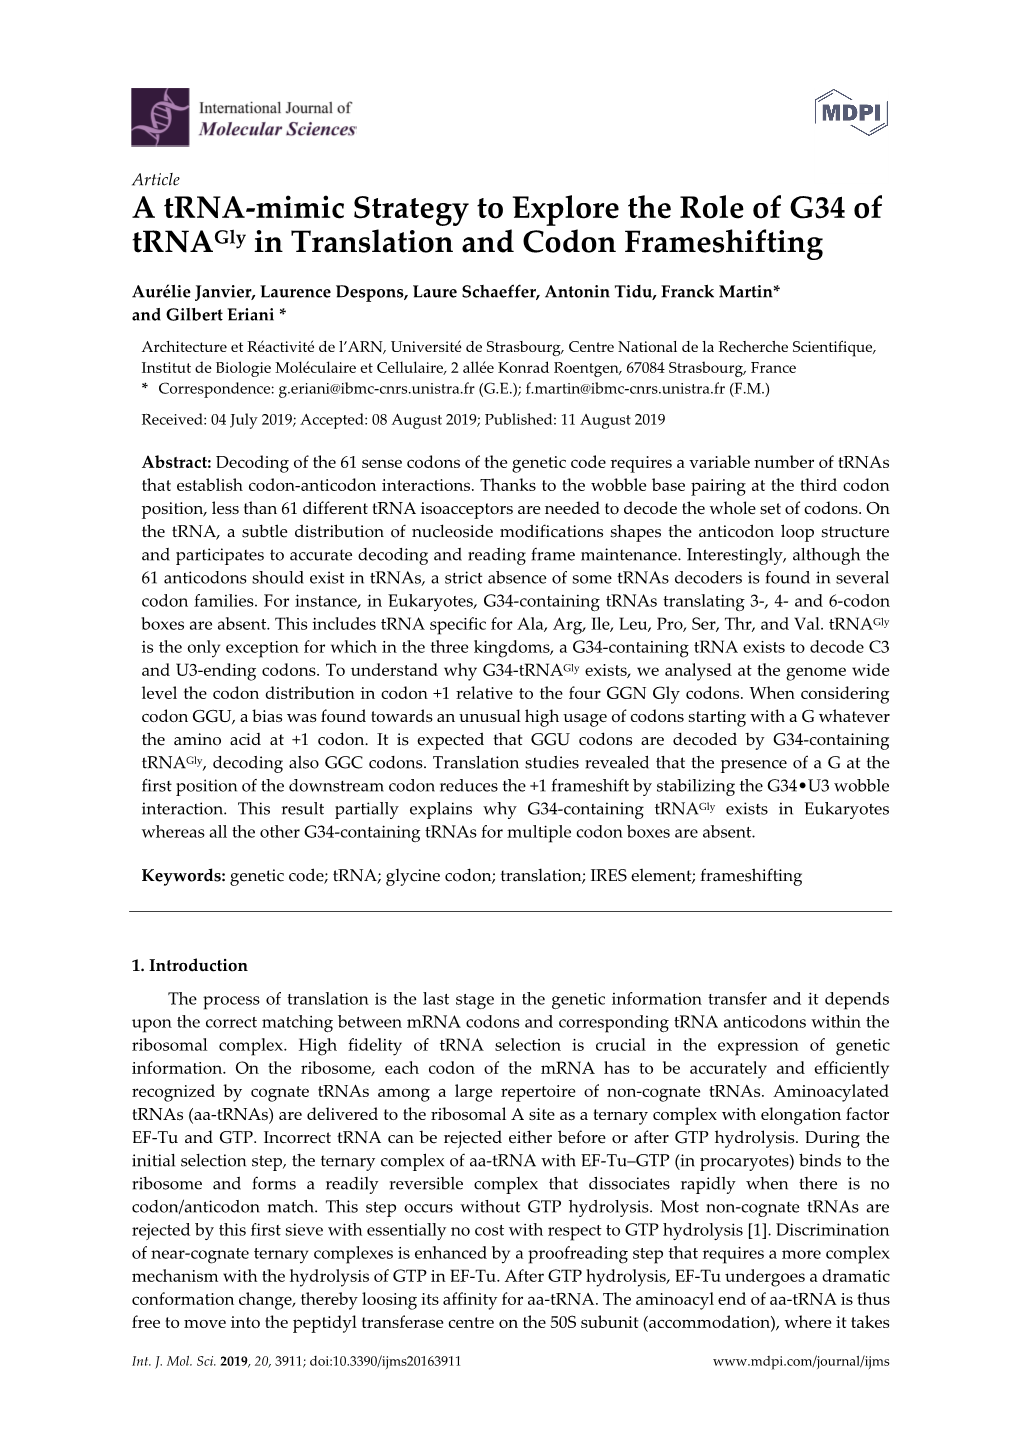 A Trna-Mimic Strategy to Explore the Role of G34 of Trnagly in Translation and Codon Frameshifting